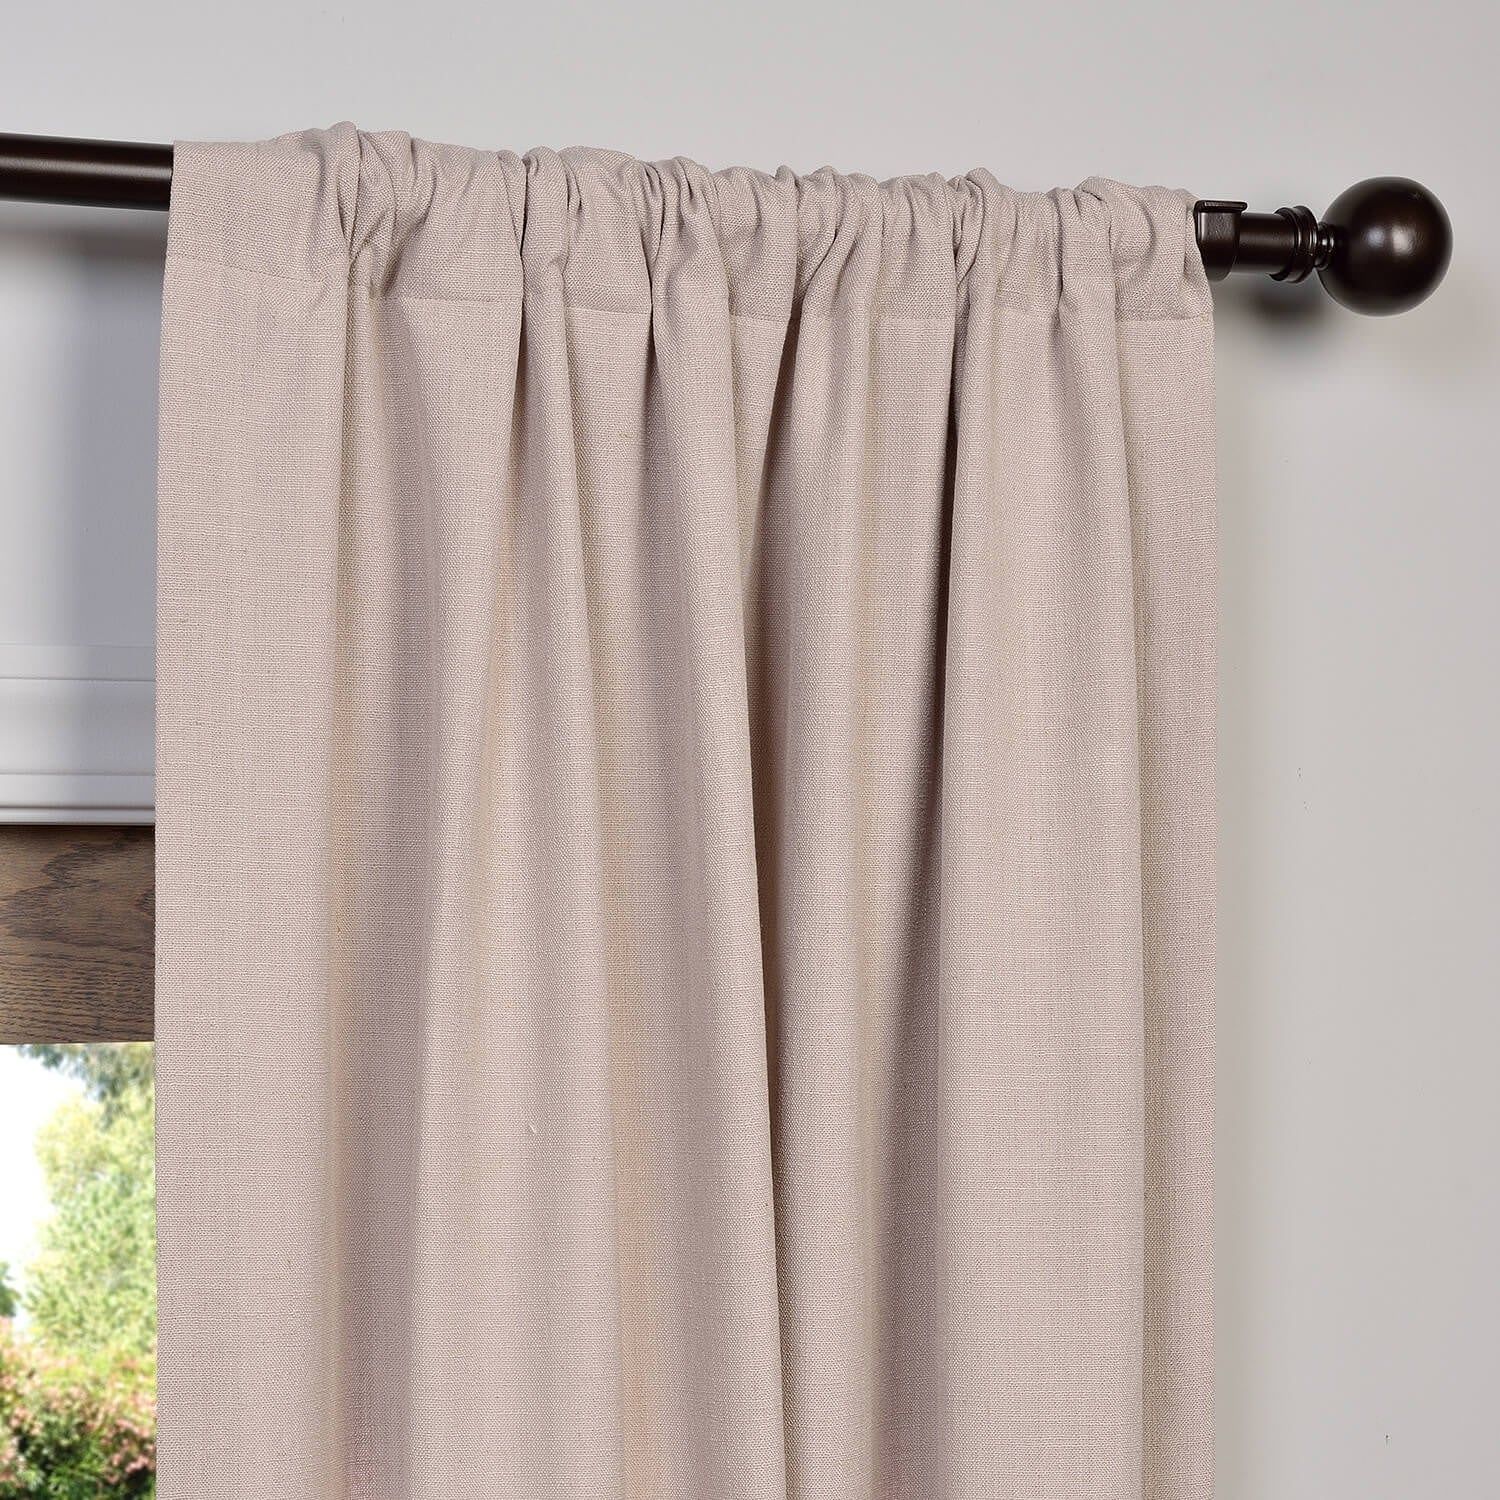 Heavy Faux Linen Single Curtain Panel With Regard To Heavy Faux Linen Single Curtain Panels (View 2 of 20)